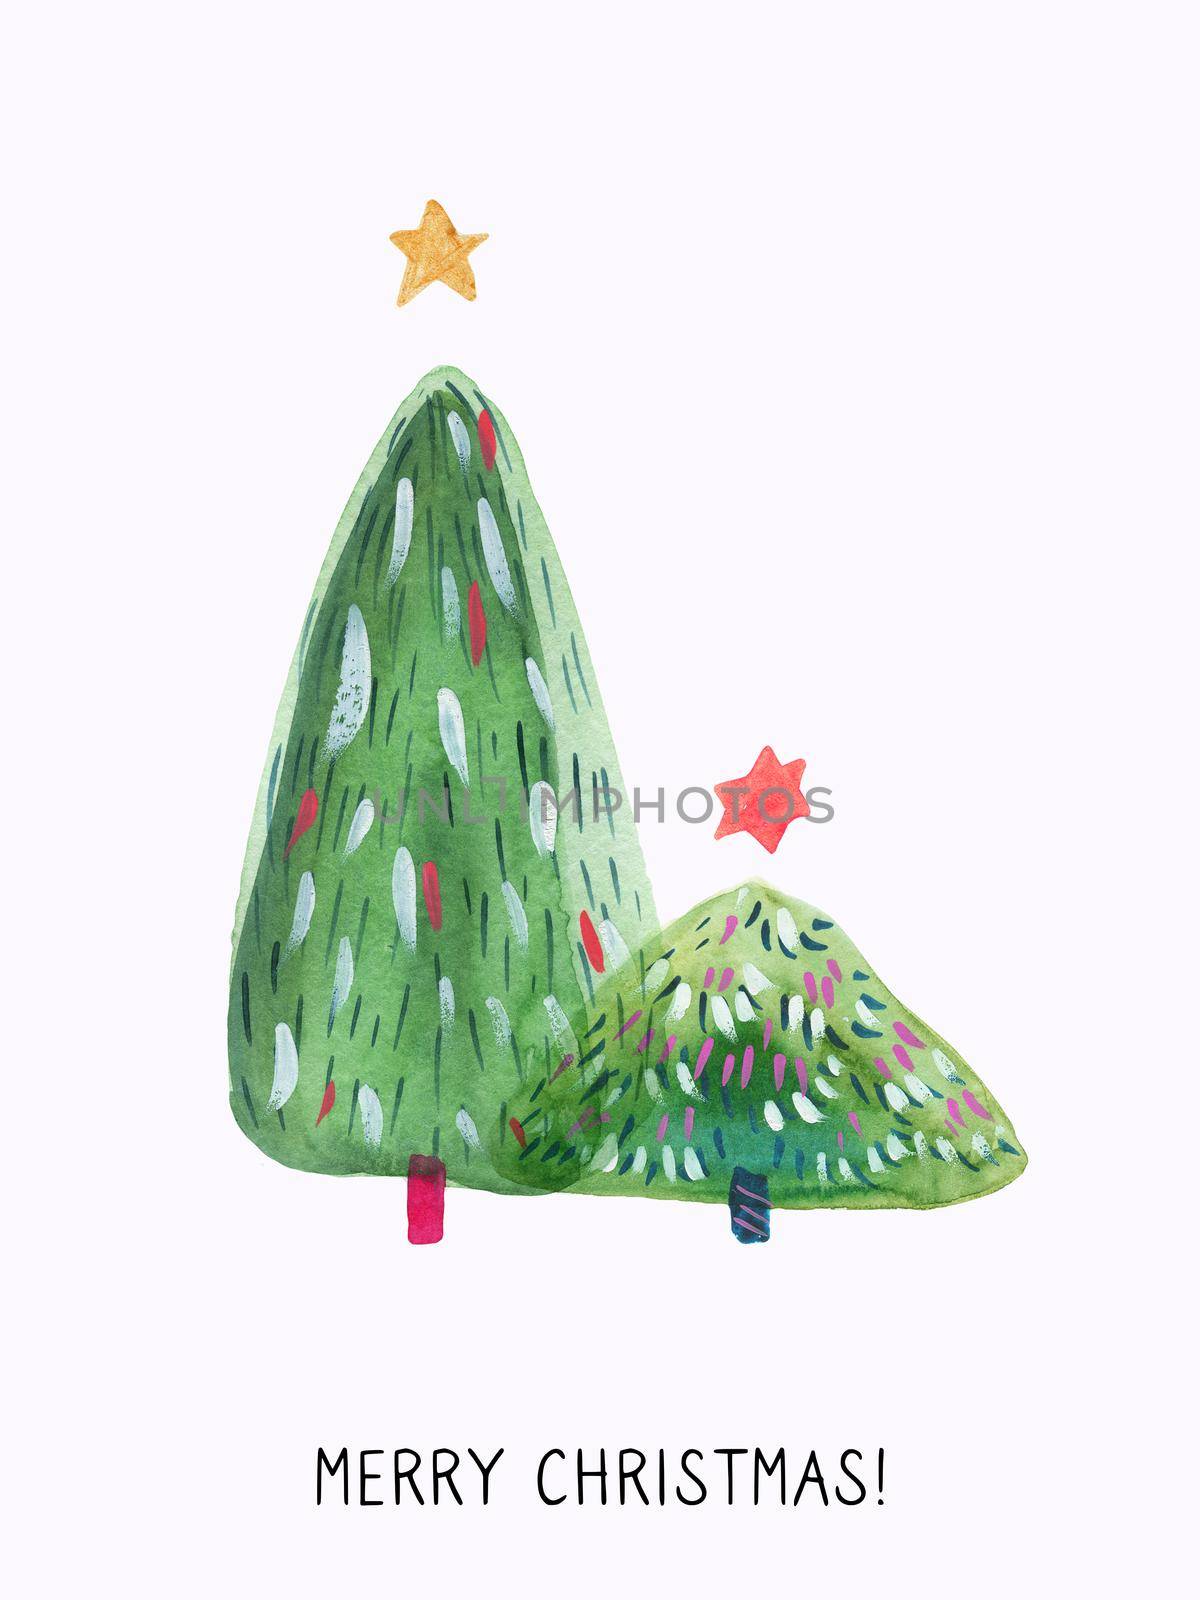 Christmas Tree hand drawn watercolor greeting card by Xeniasnowstorm